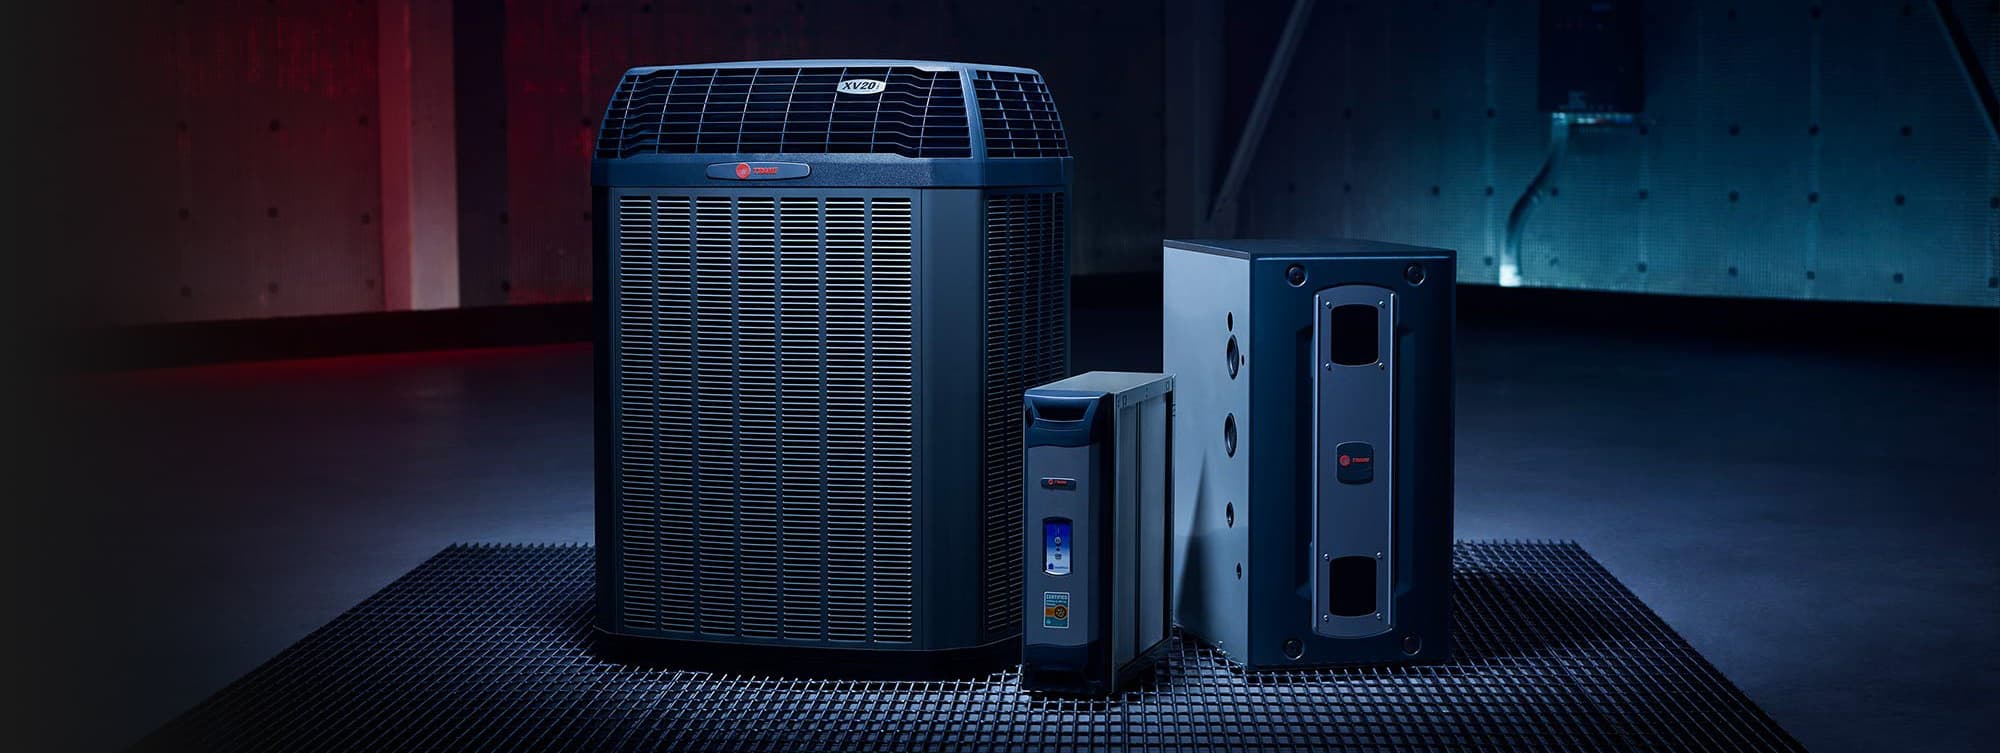 Heating and cooling units